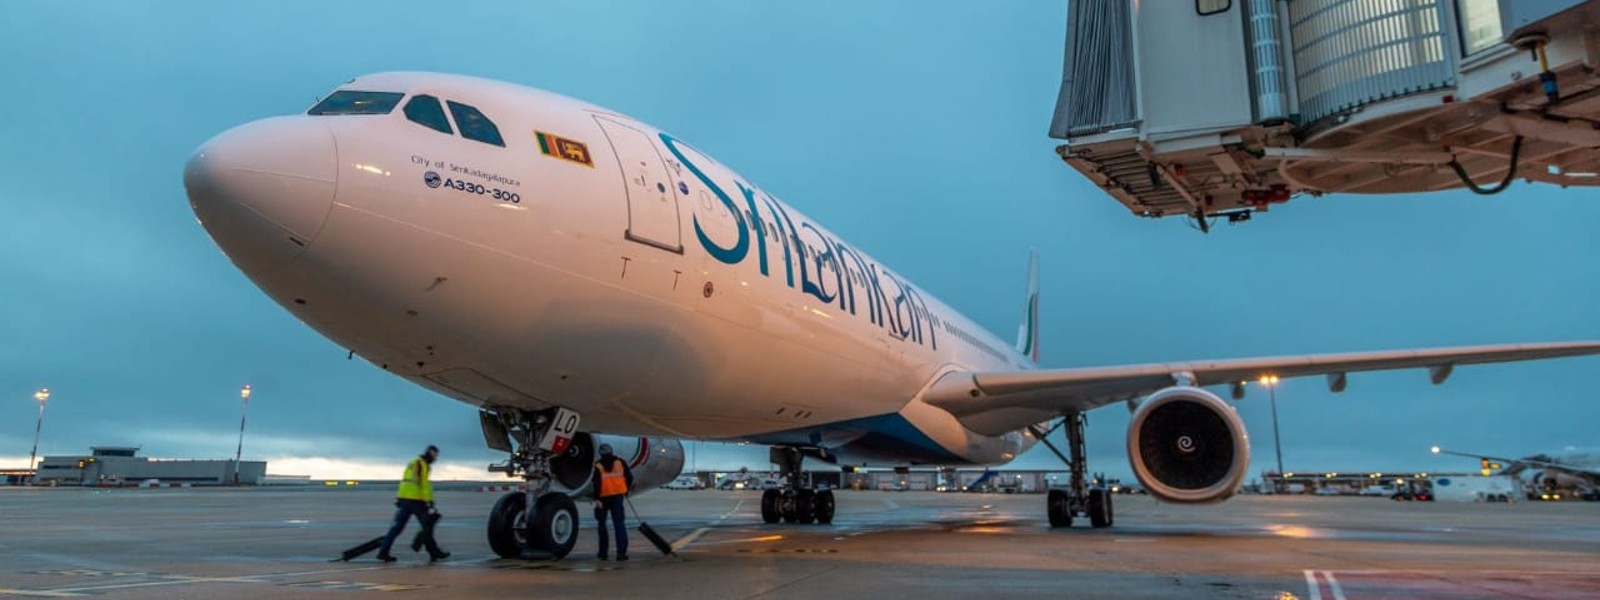 SriLankan Airlines to lease 21 aircrafts as long-term business strategy